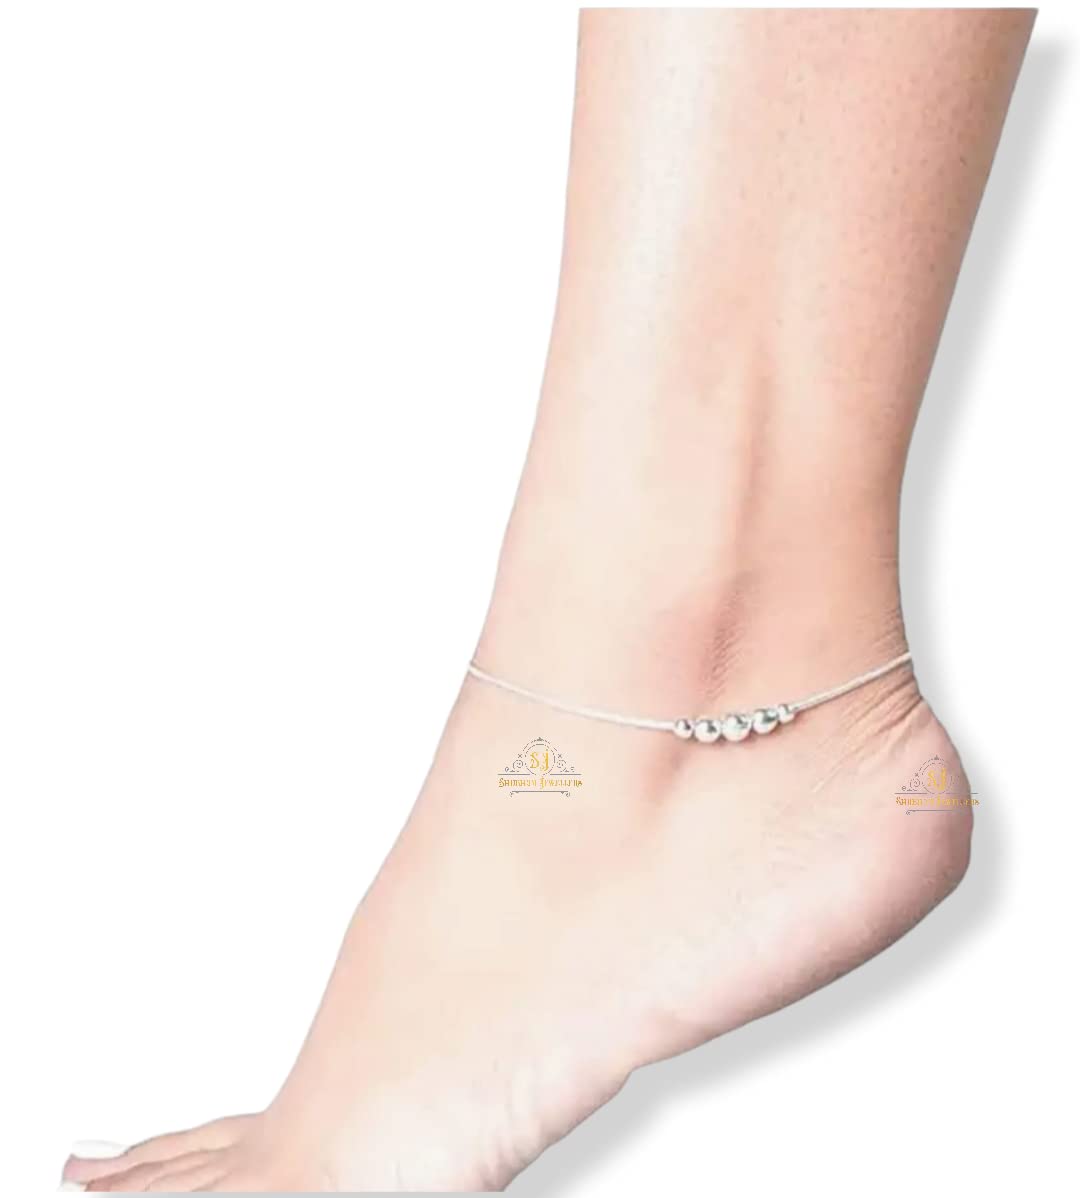 SJ SHUBHAM JEWELLERS™ Pure Silver 5 Moving Ball Threaded Snake Pattern Anklet (Payal) in Pure 92.5 Pure Sterling Silver for Girls & Women (Silver) - JewelYaari By Shubham Jewellers